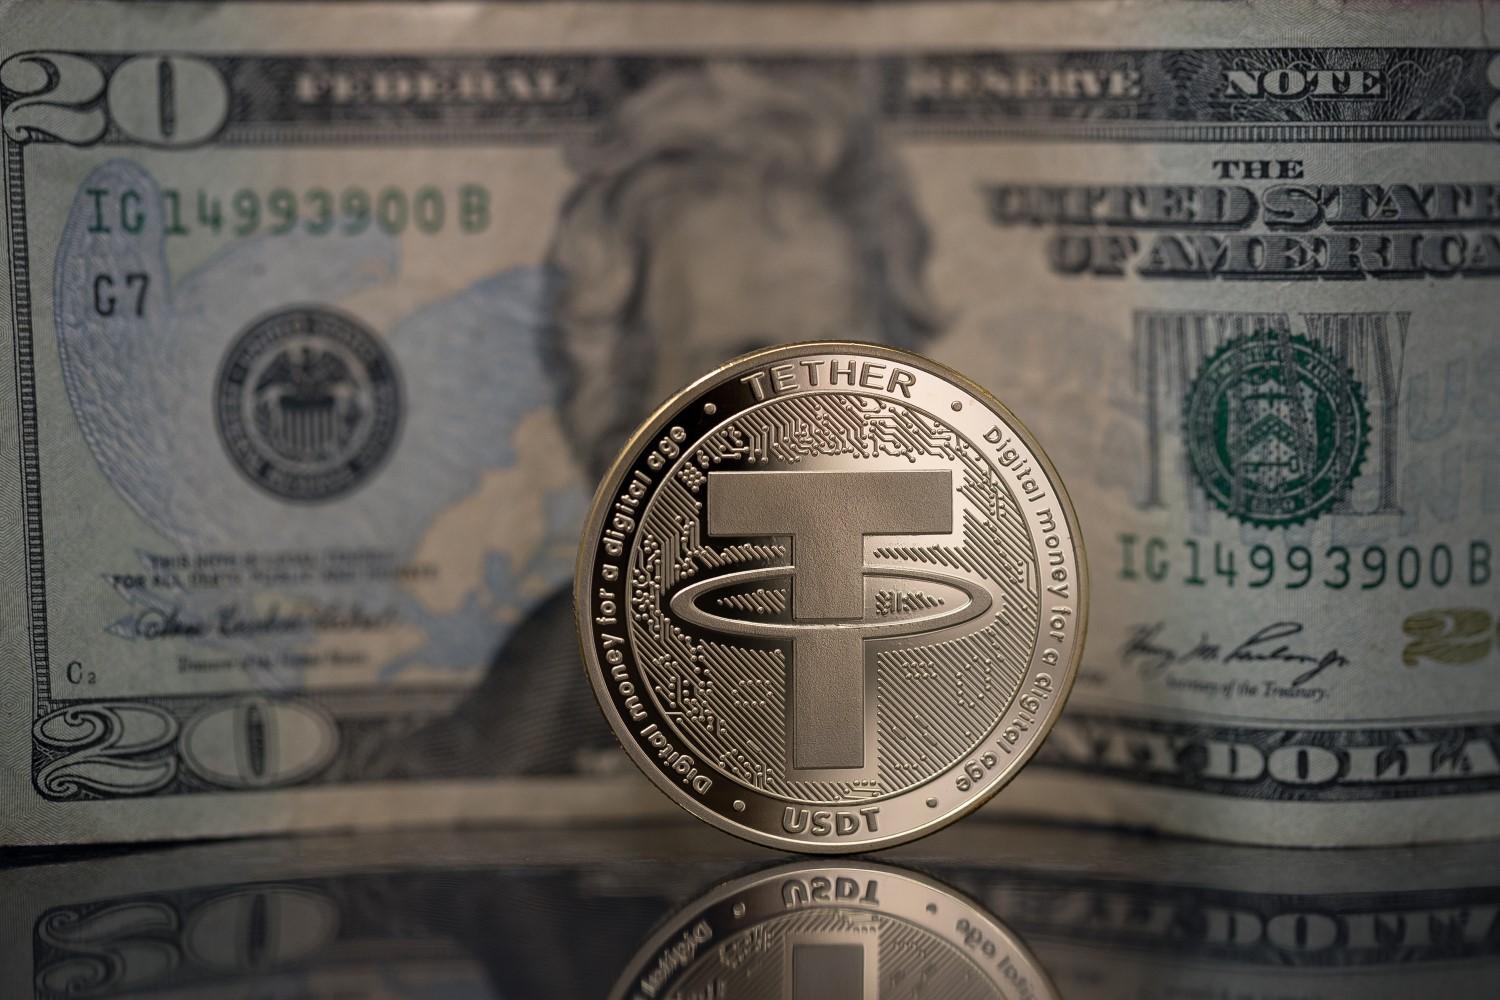 Tether Says Its USDT Stablecoin May Not Be Backed By Fiat Alone - CoinDesk